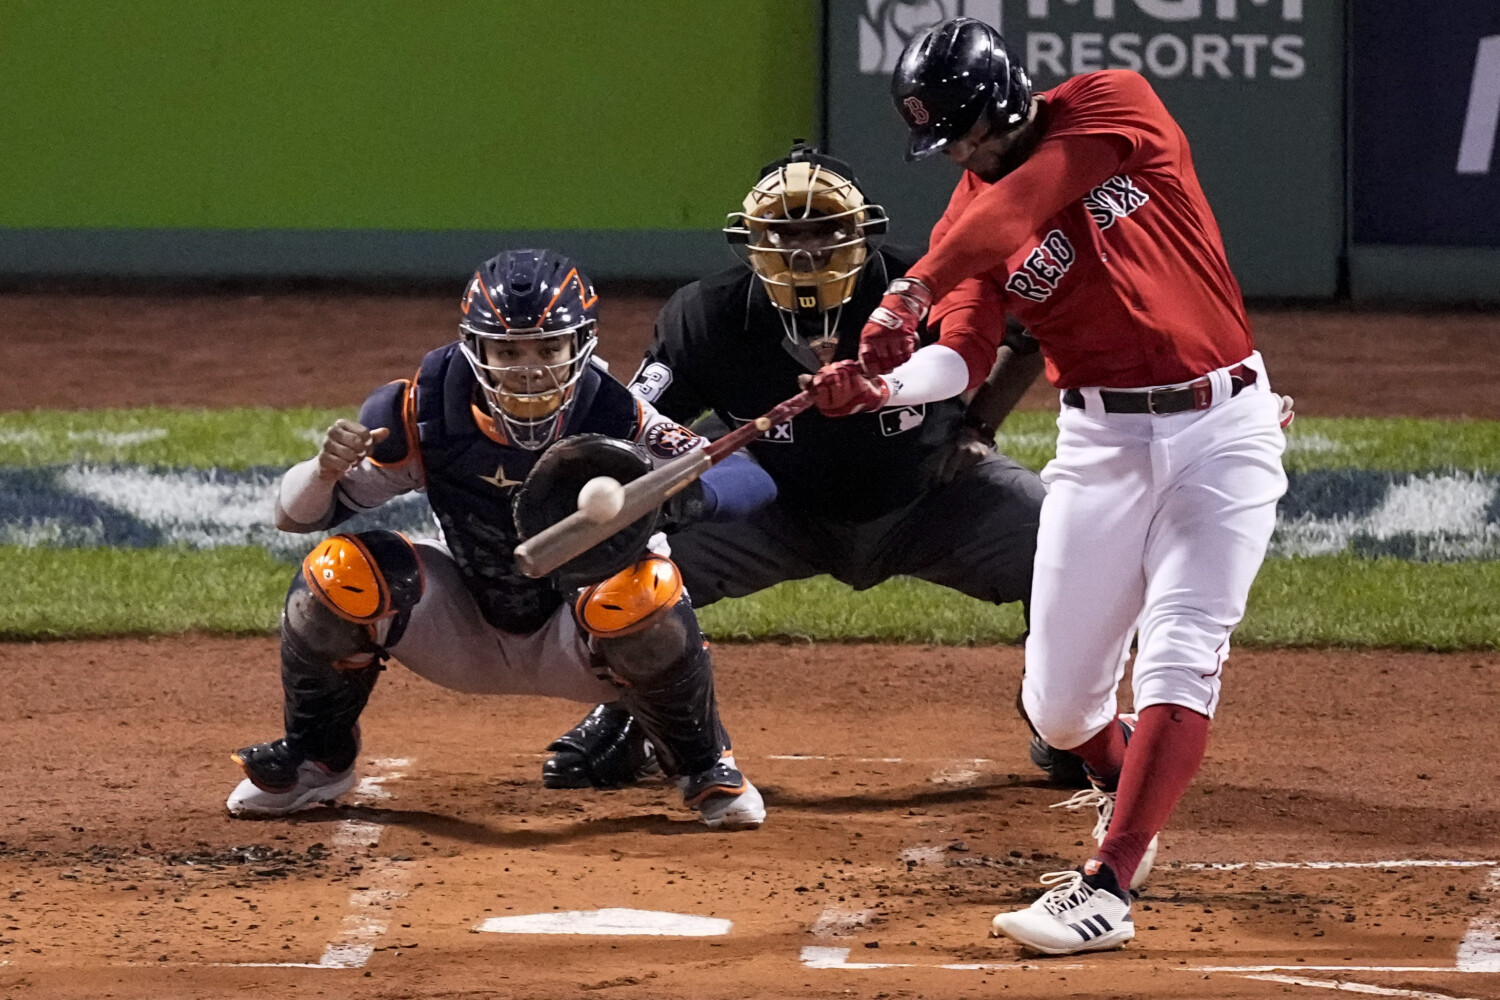 Commentary: Red Sox shortstop Xander Bogaerts continues to be